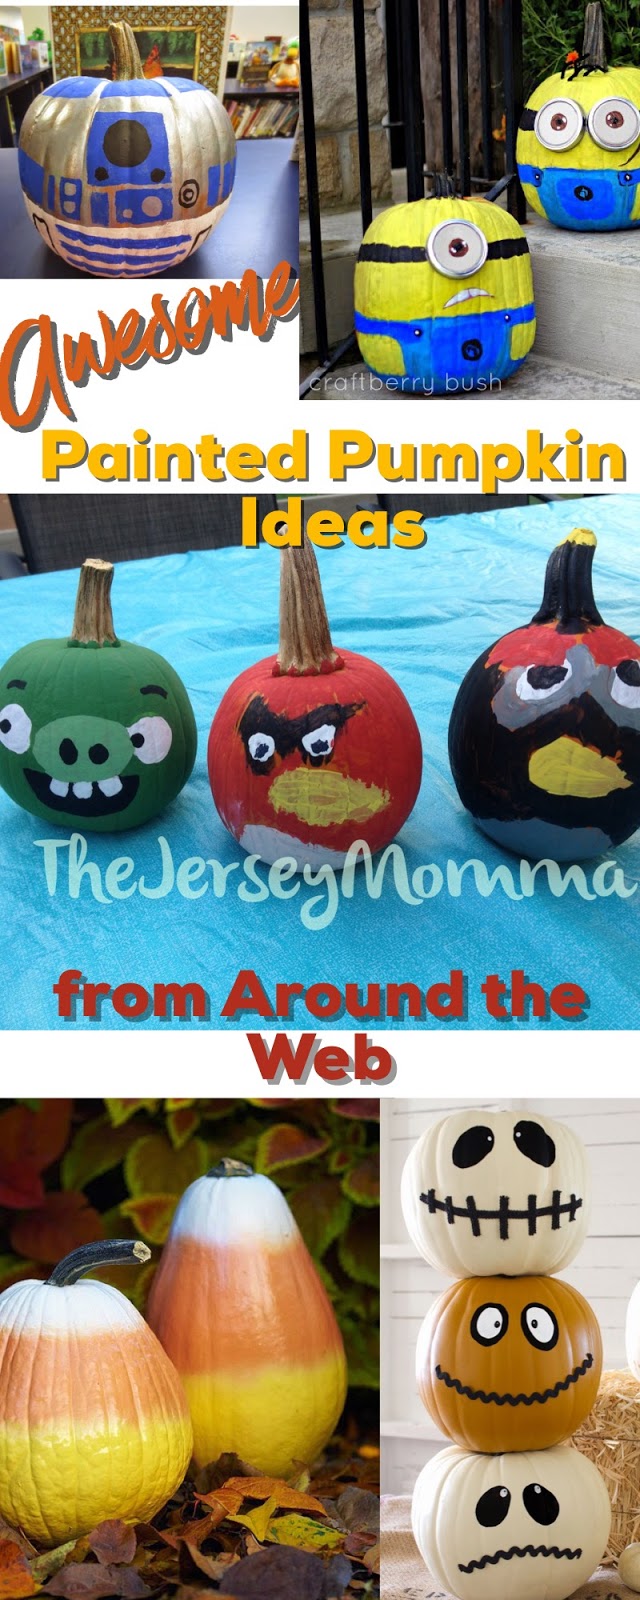 The Jersey Momma: Awesome Painted Pumpkin Ideas from Around the Web